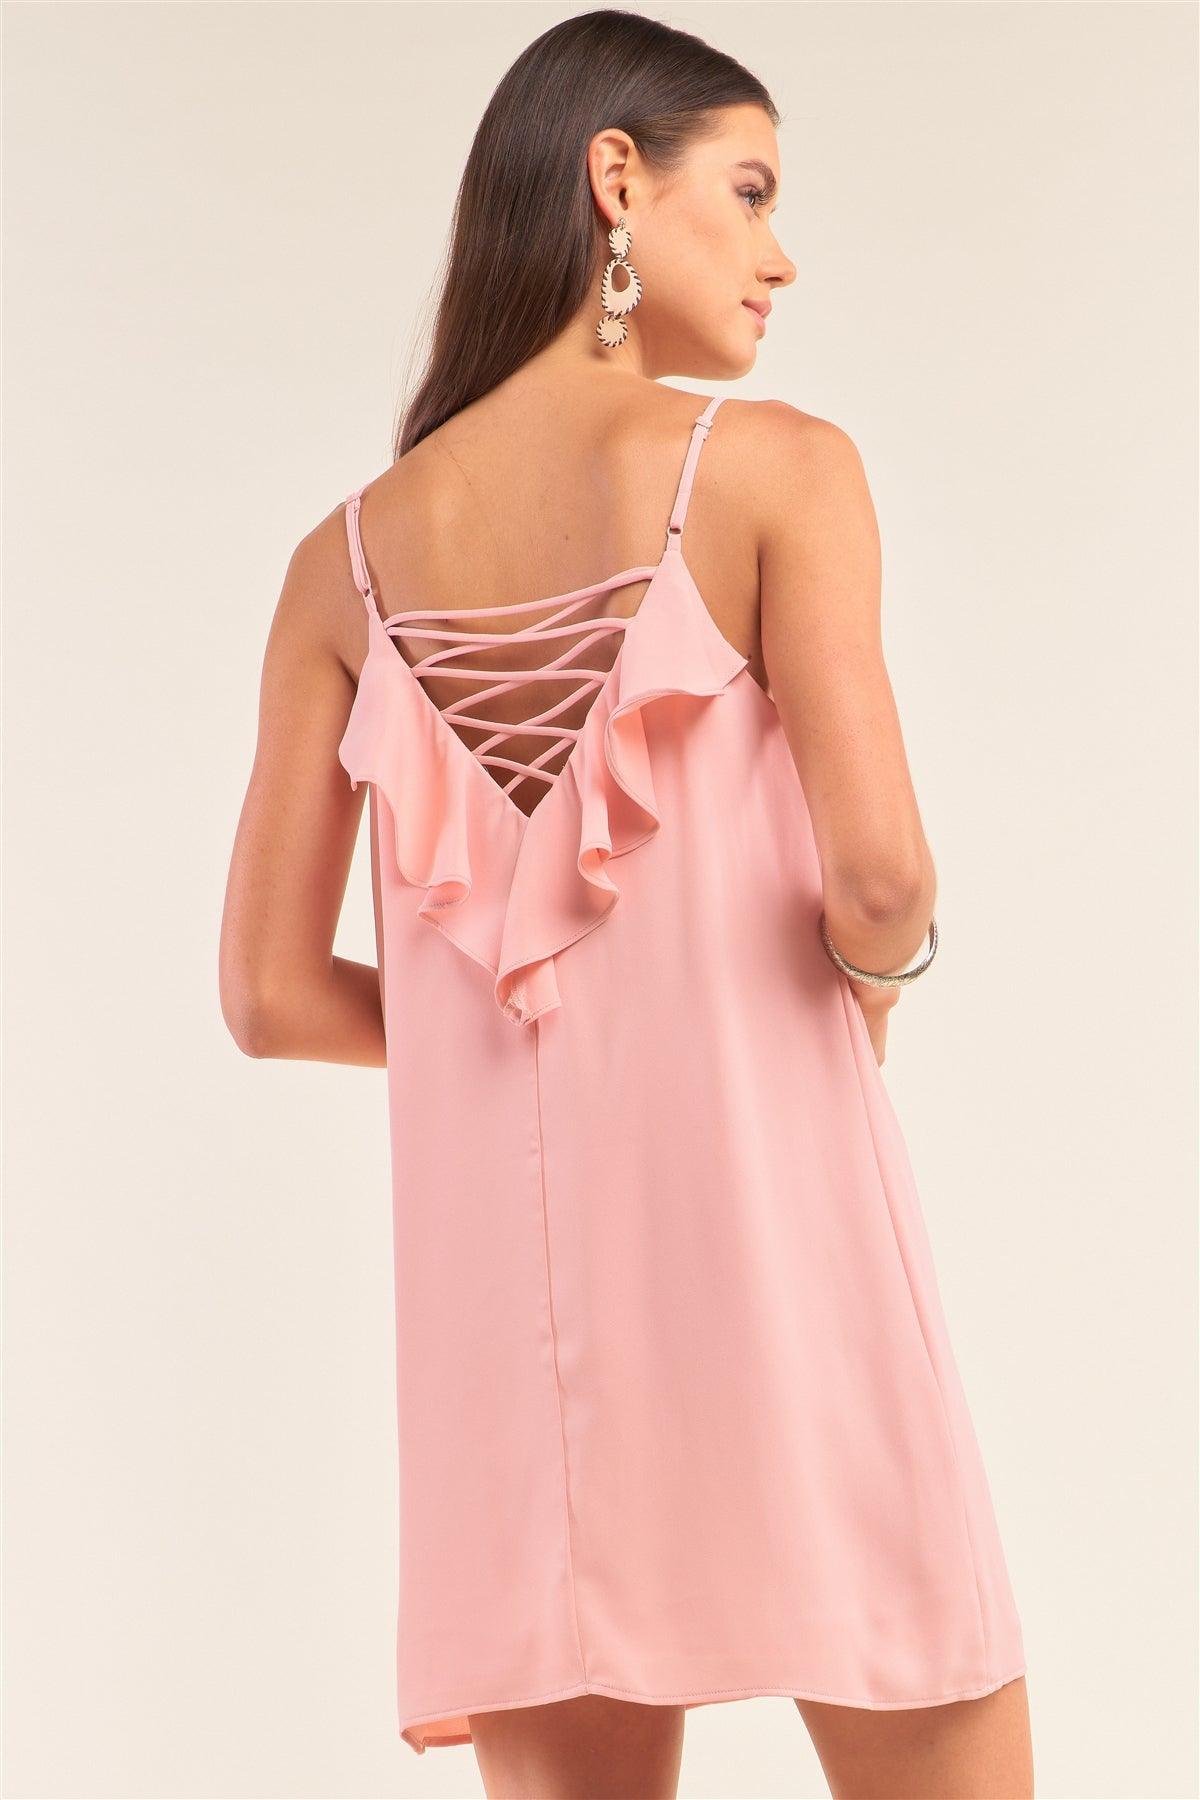 Peach Sleeveless Relaxed Fit Ruffle V-Neck Corset Inspired Lace-Up Back Detail Mini Dress /1-1-2-1